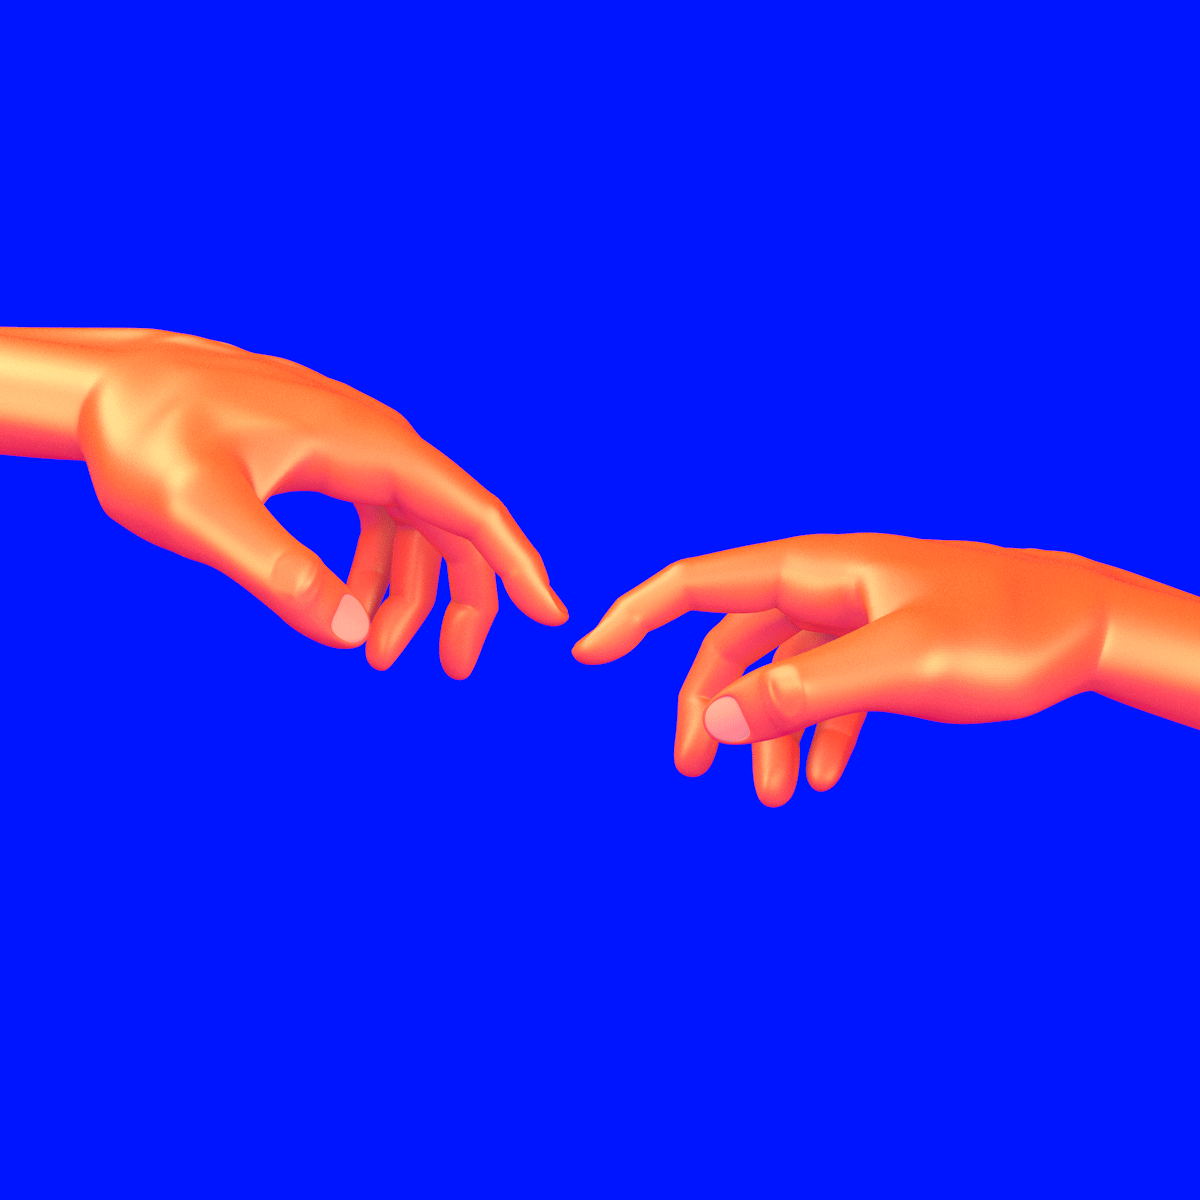 Hands GIFs - Find & Share on GIPHY